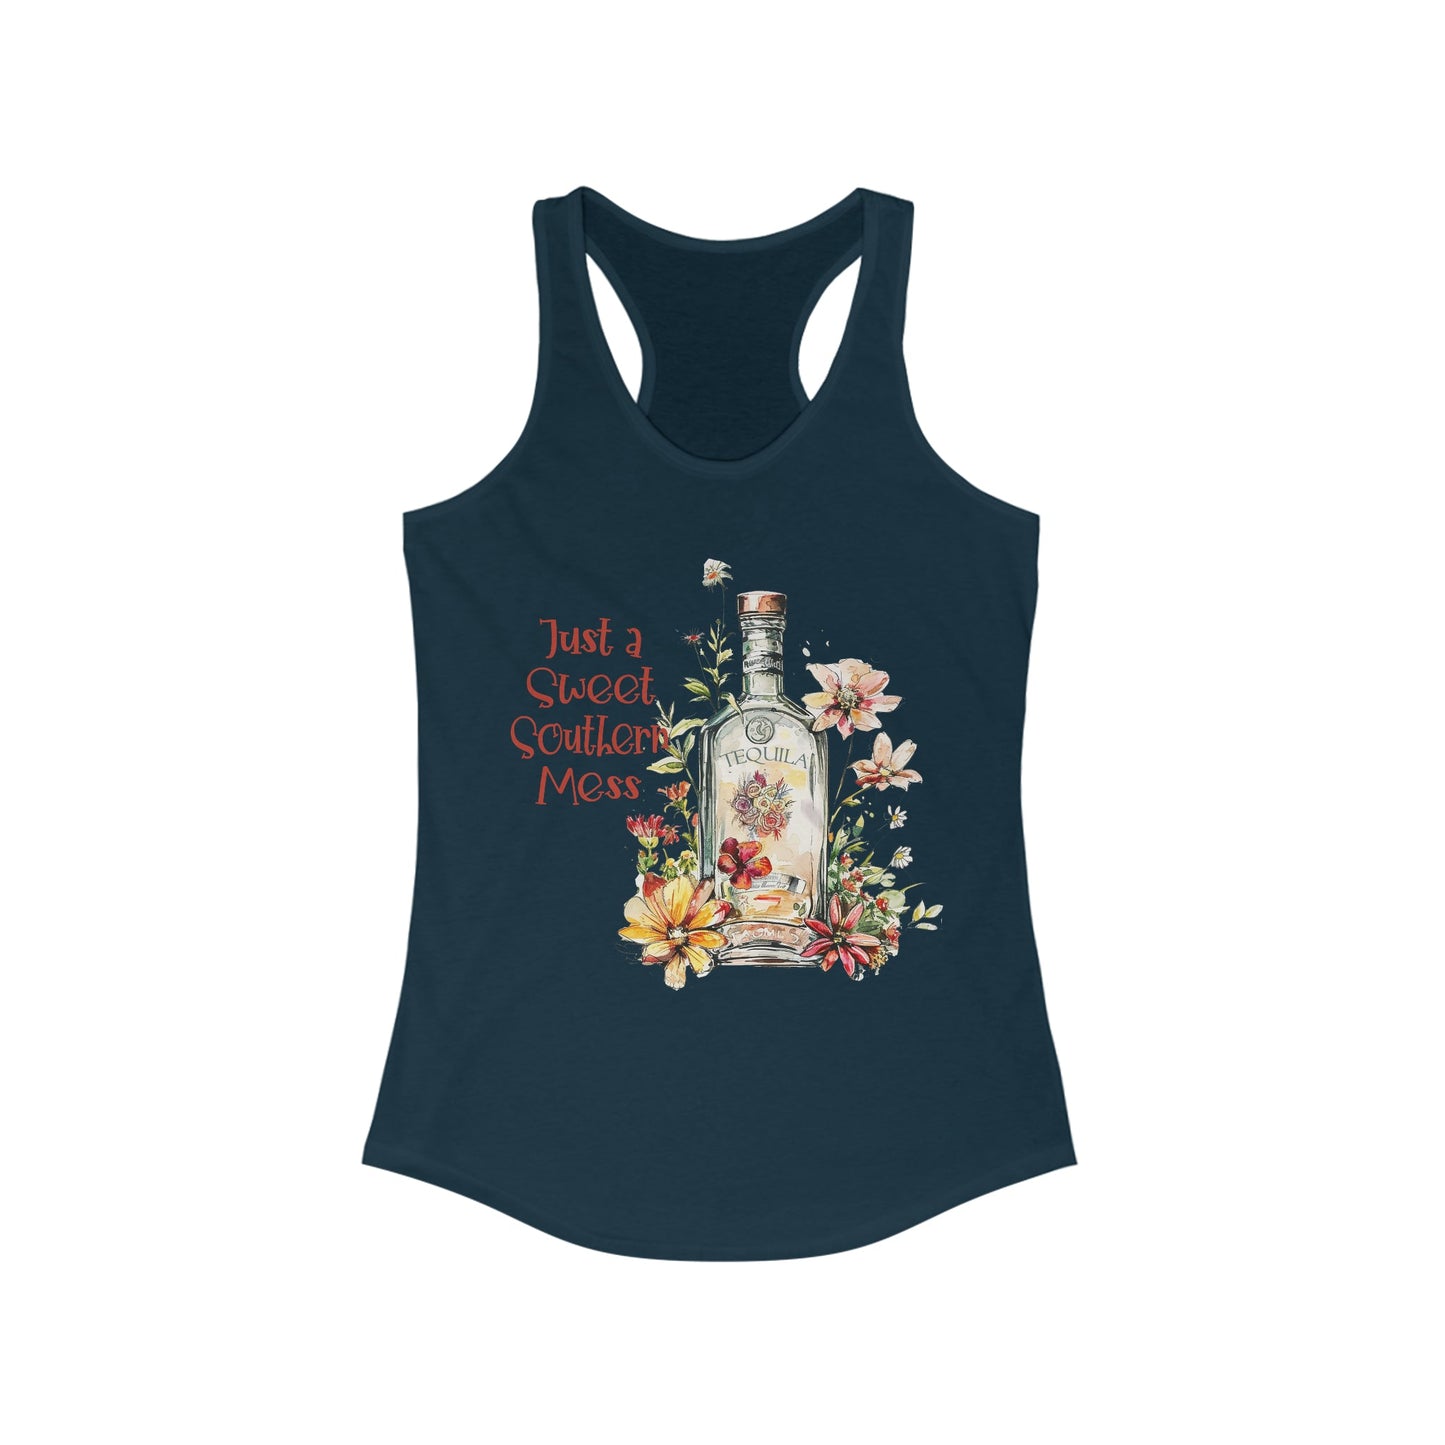 Cowgirl & Tequila Tank Top With Wildflowers Floral Design, Racerback Tank Top - FlooredByArt